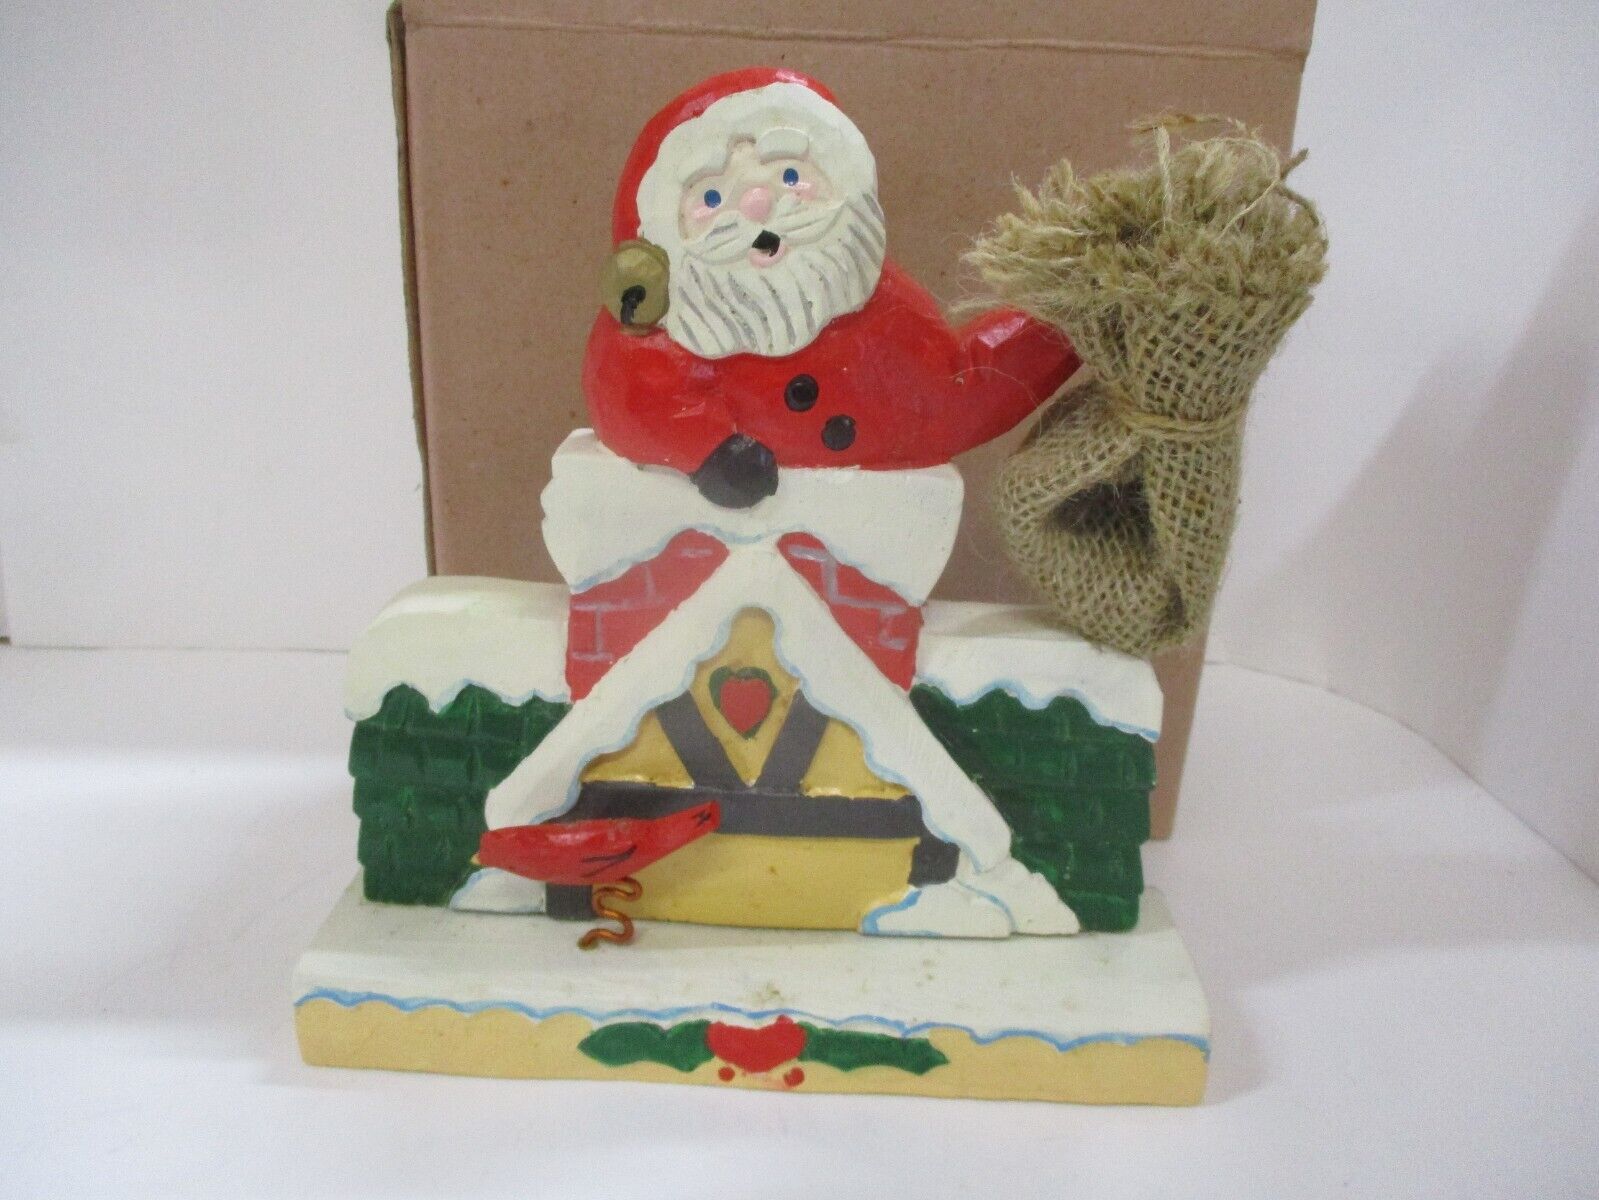 Vintage Terry’s Village Santa Coming out of Chimney Wood Figure